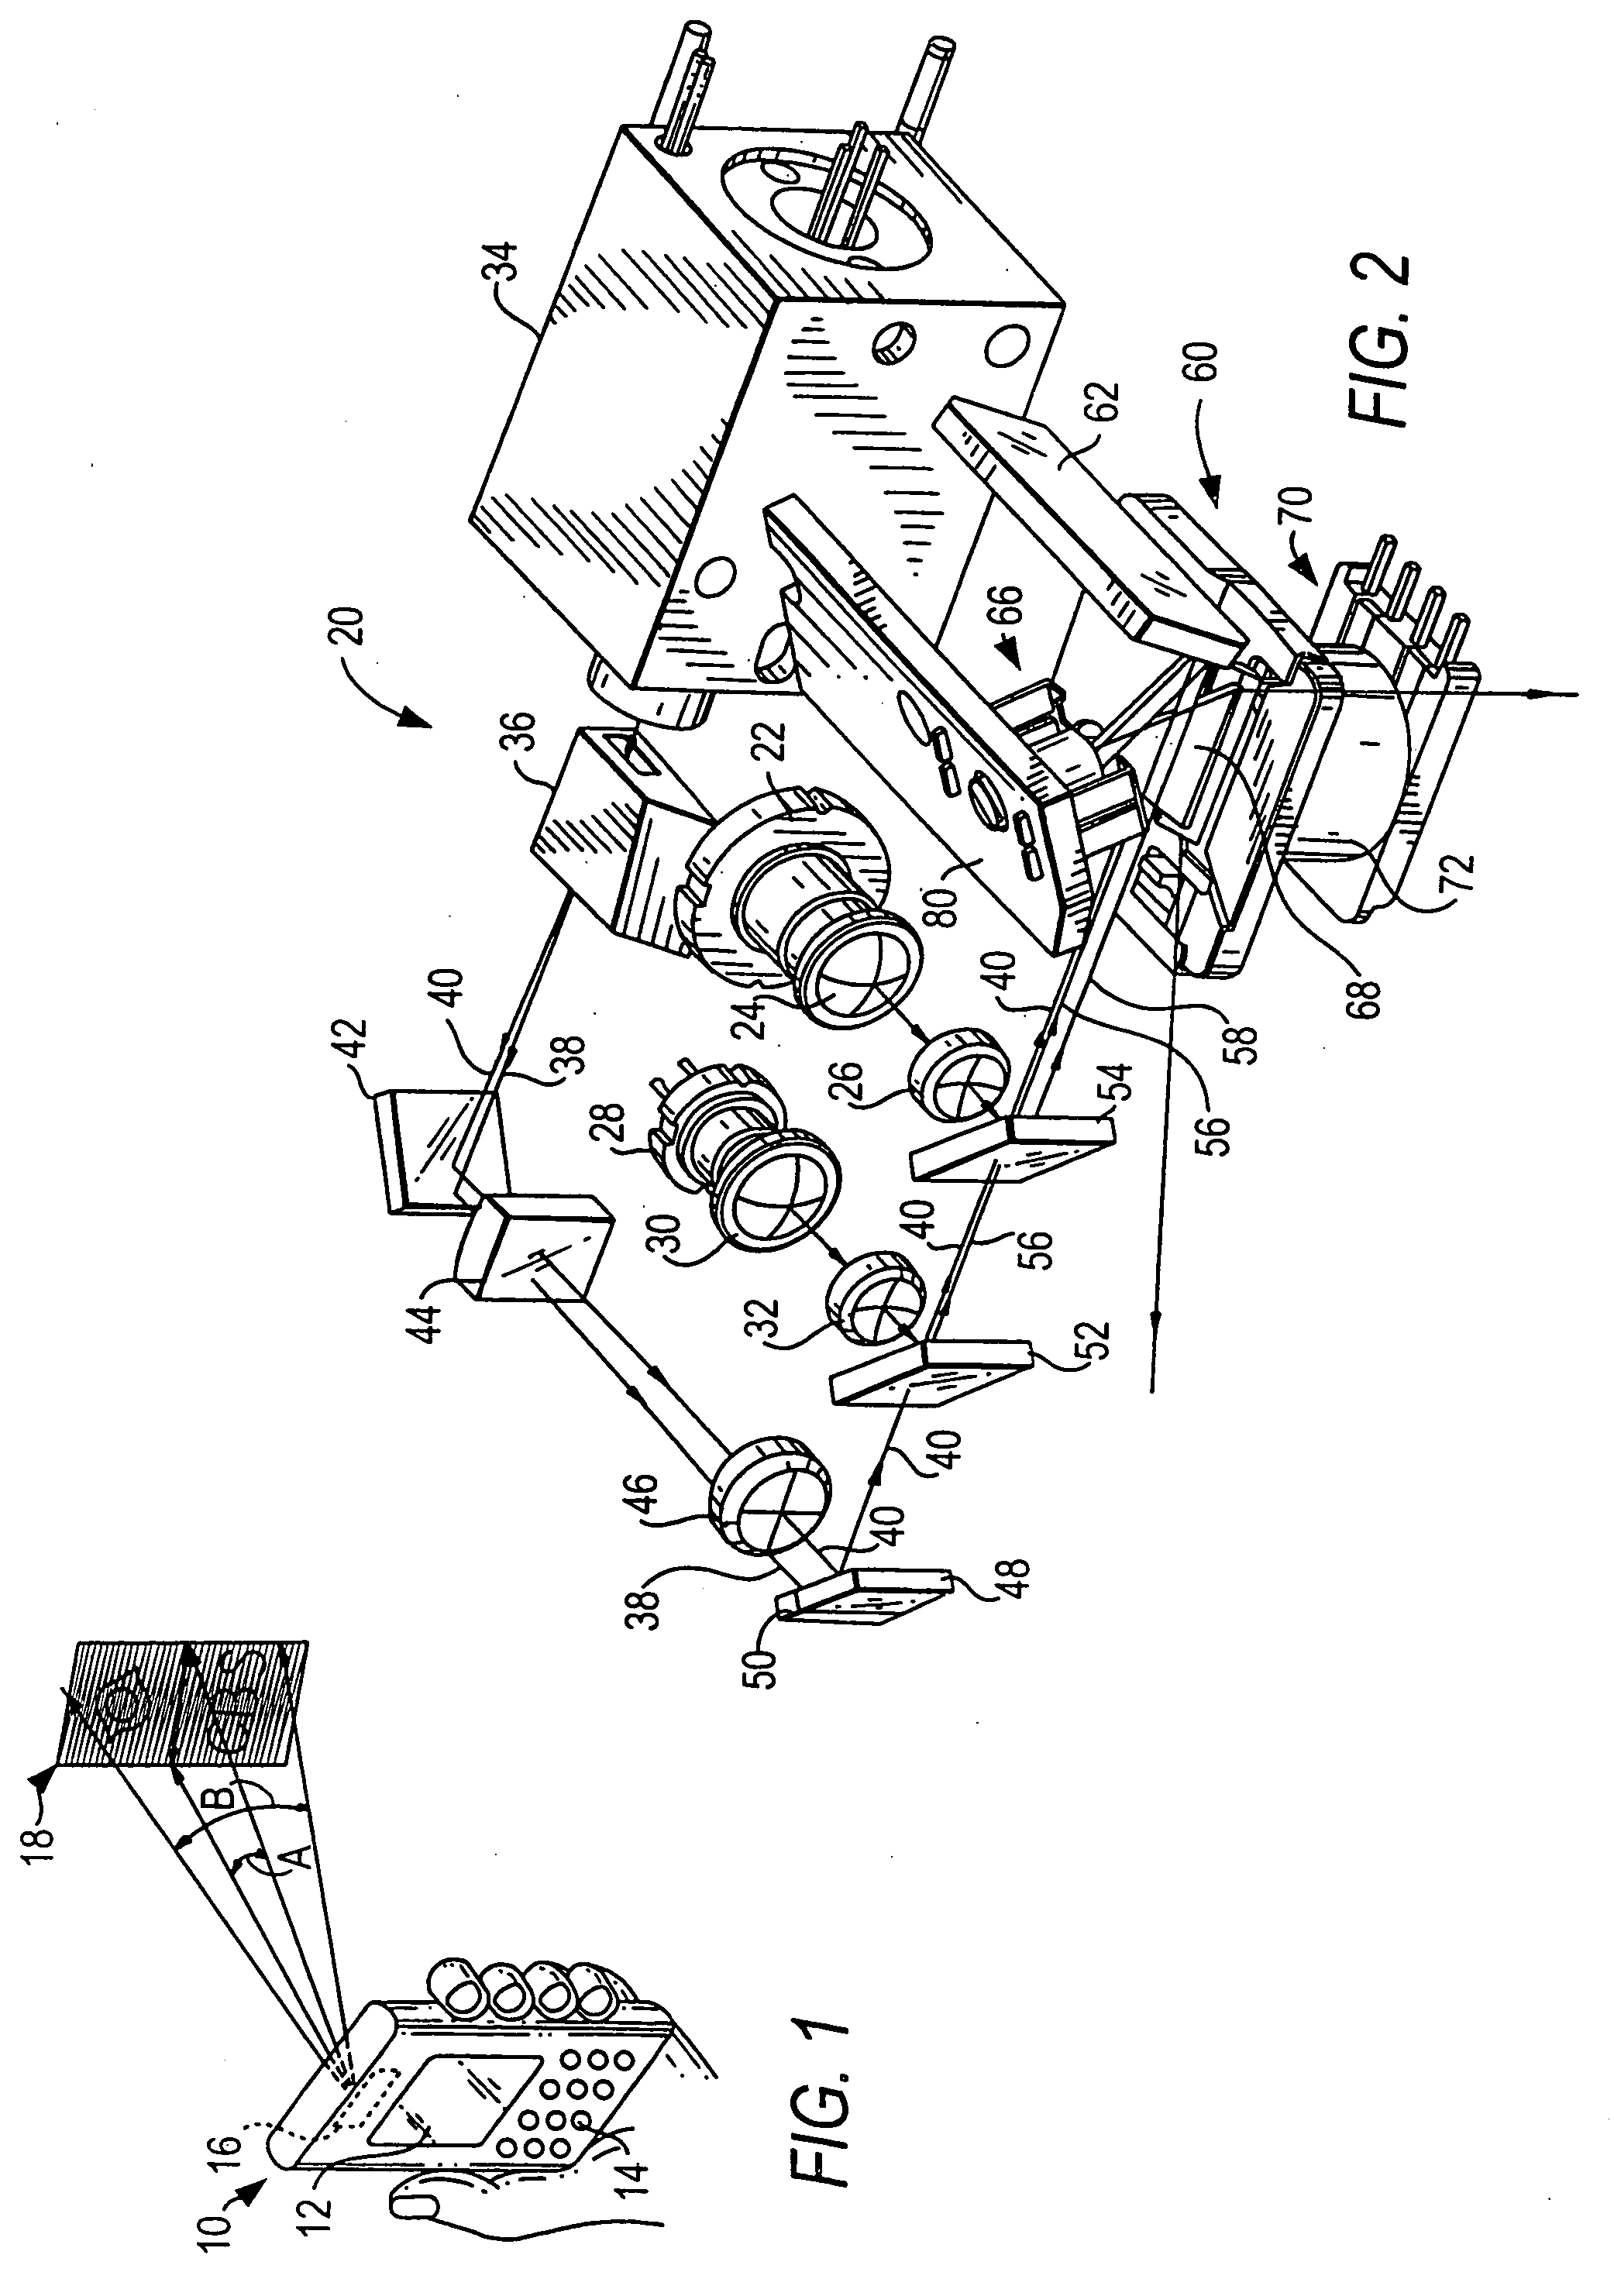 Taut, torsional flexure and a compact drive for, and method of, scanning light using the flexure